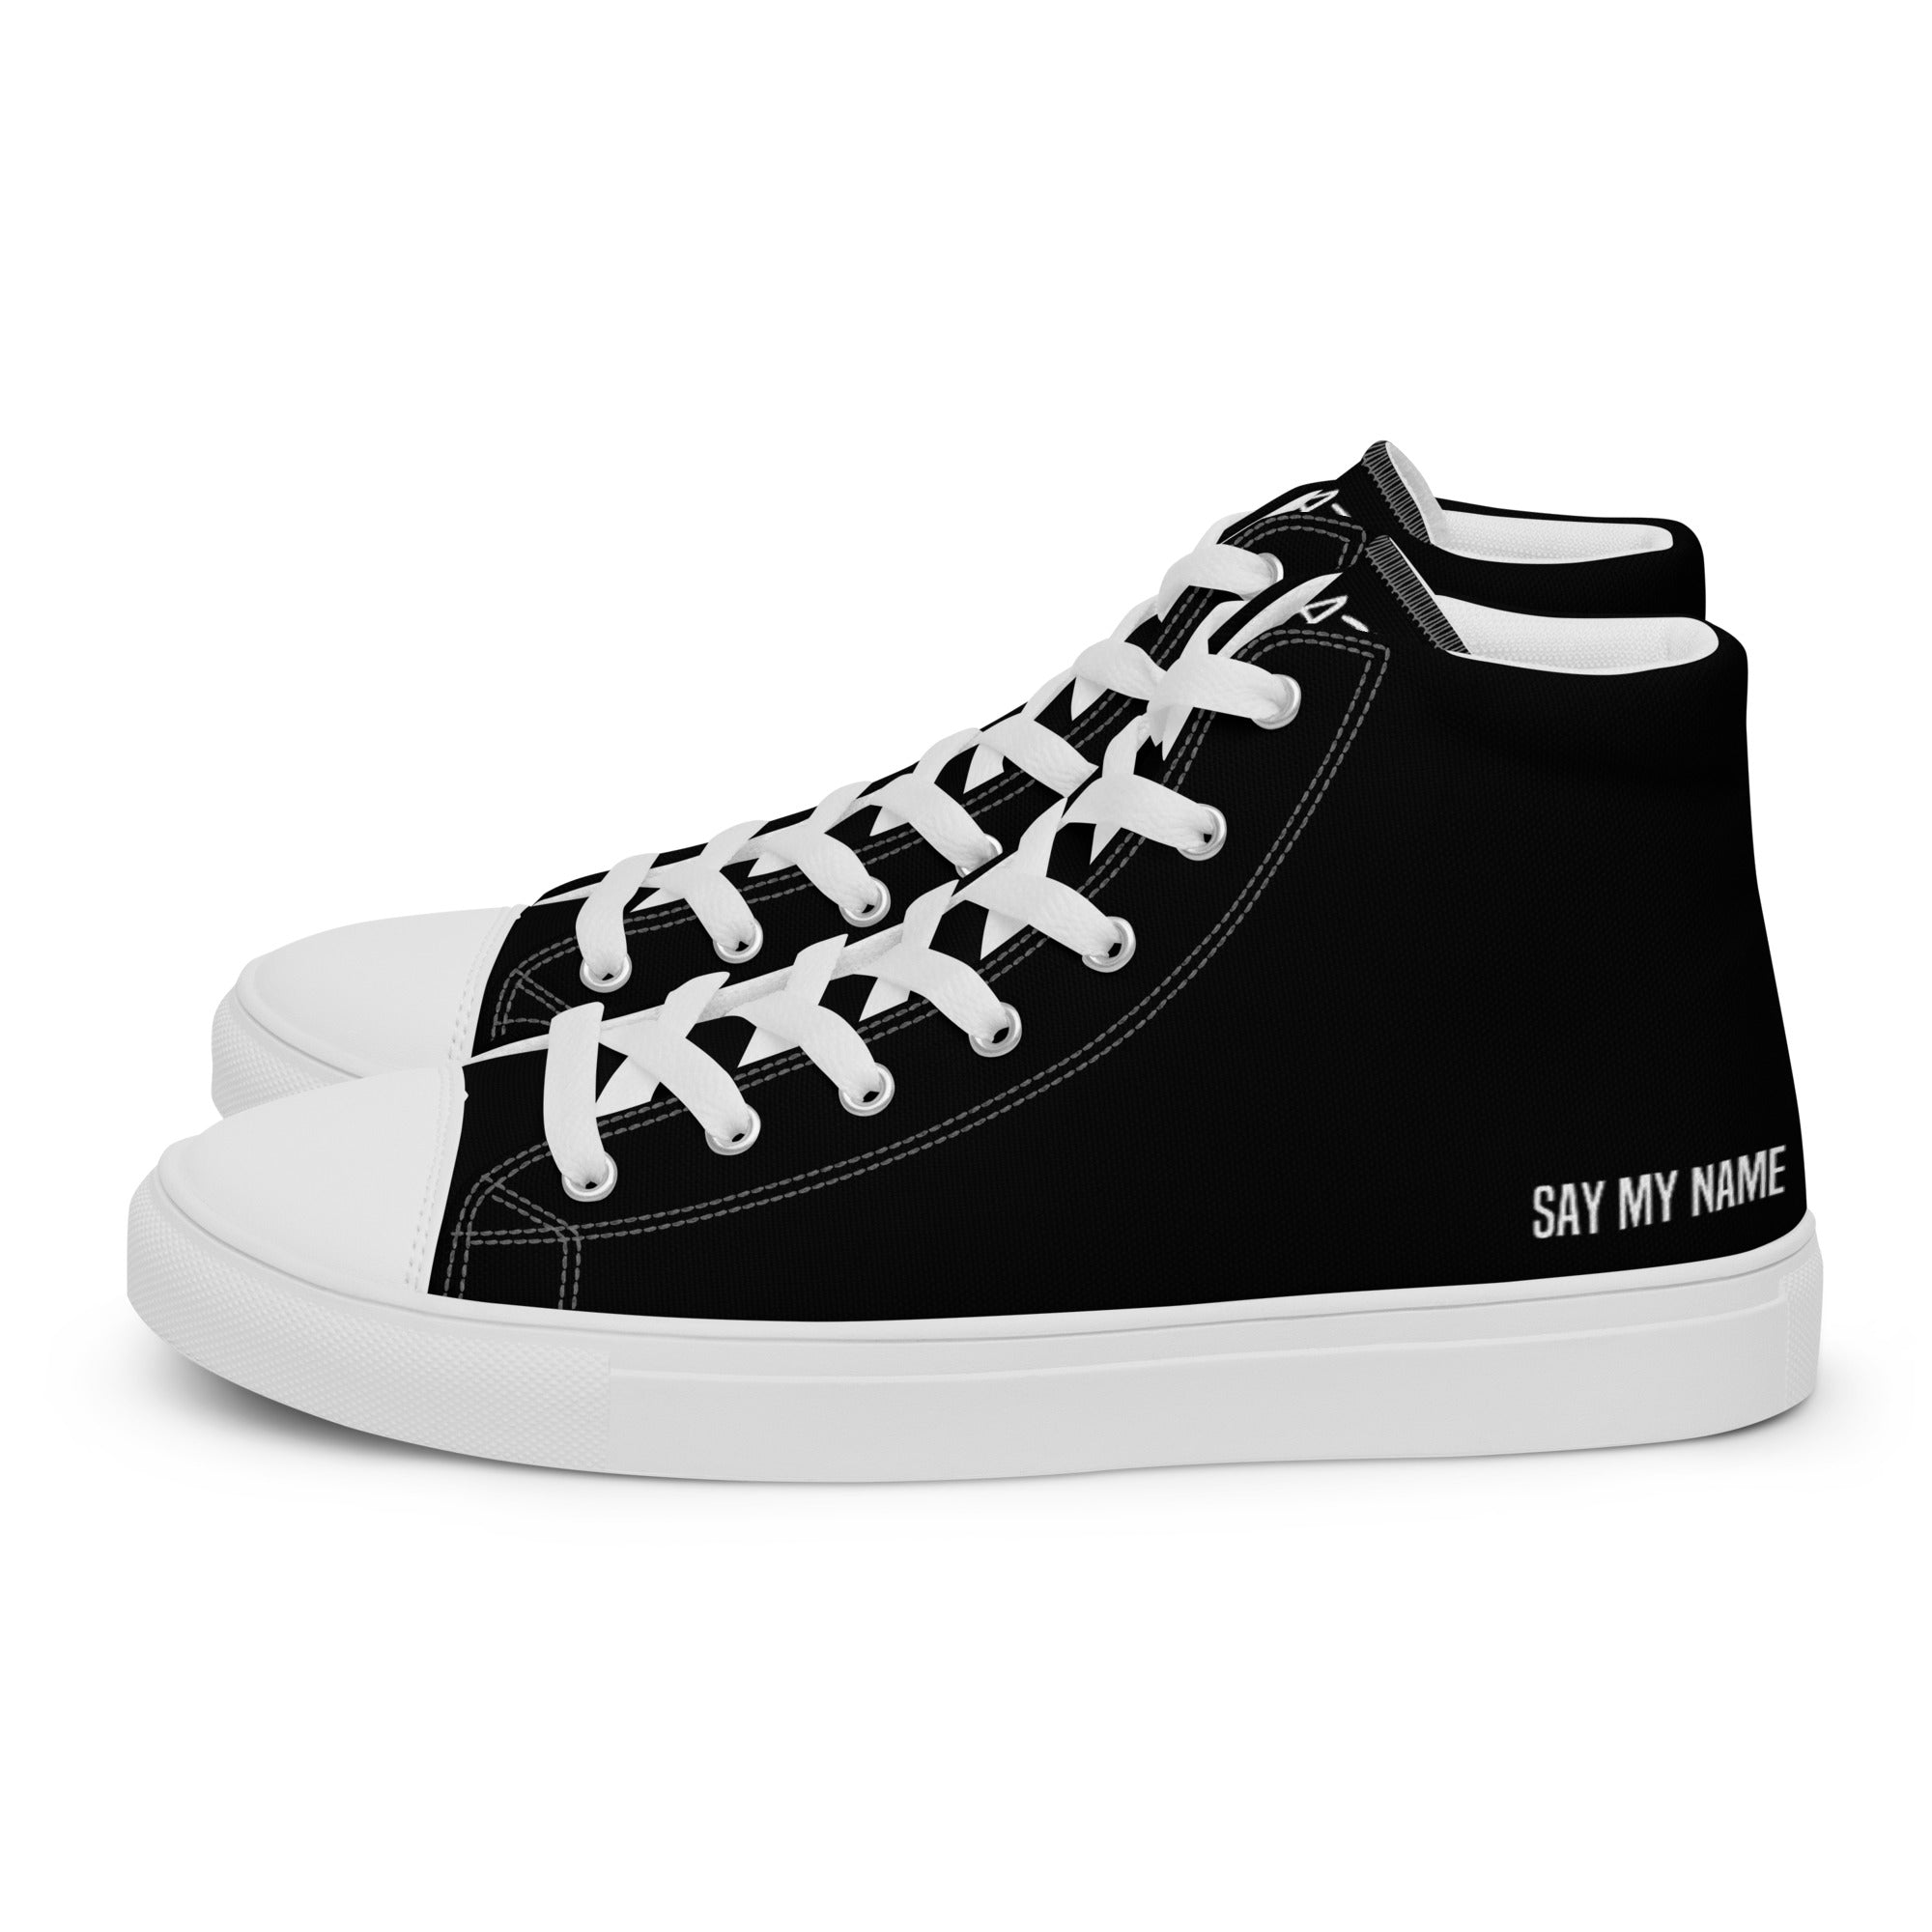 "SAY MY NAME" women's high black canvas sneakers